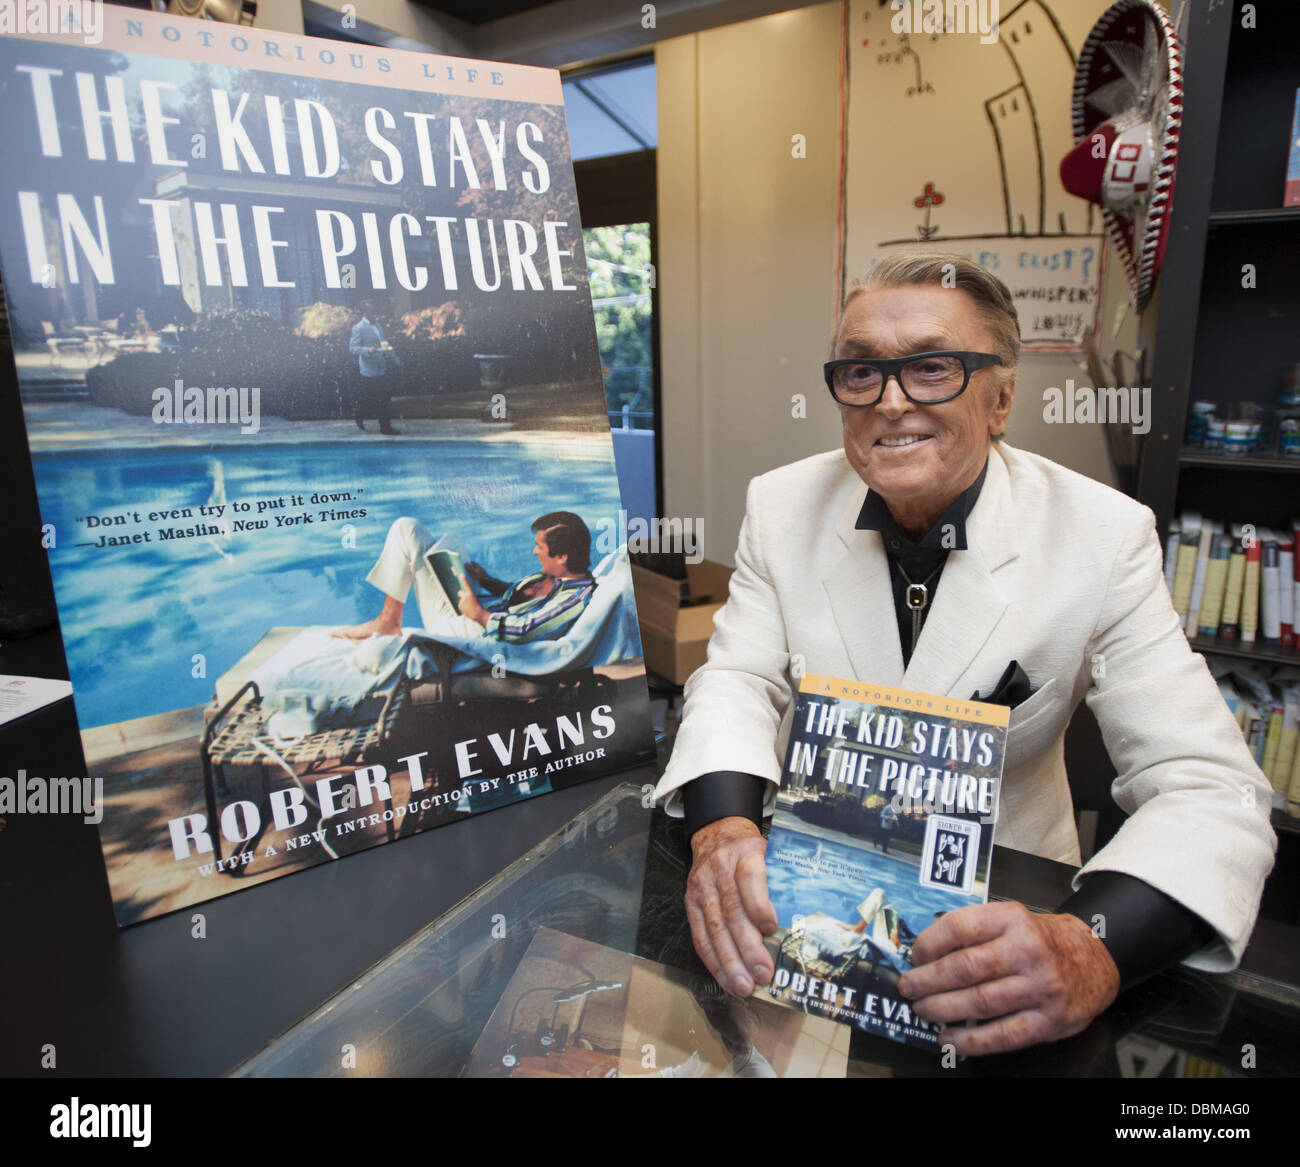 Hollywood, California, USA. 31st July, 2013. Hollywood producer Robert Evans' tell-all book details his life in Hollywood as an actor and later a movie producer bringing films like The Godfather, Chinatown and Urban Cowboy to the silver screen. According to Evans the title for his book comes from his role as Pedro Romero in the 1957 adaption for Hemingway's book The Sun Also Rises---Darryl Zanuck had cast Evans in the role against the wishes of Ava Gardner and Hemingway.----ROBERT EVANS sits with his book at Book Soup before doing a reading and signing the book for about 150 admirers.///AD Stock Photo